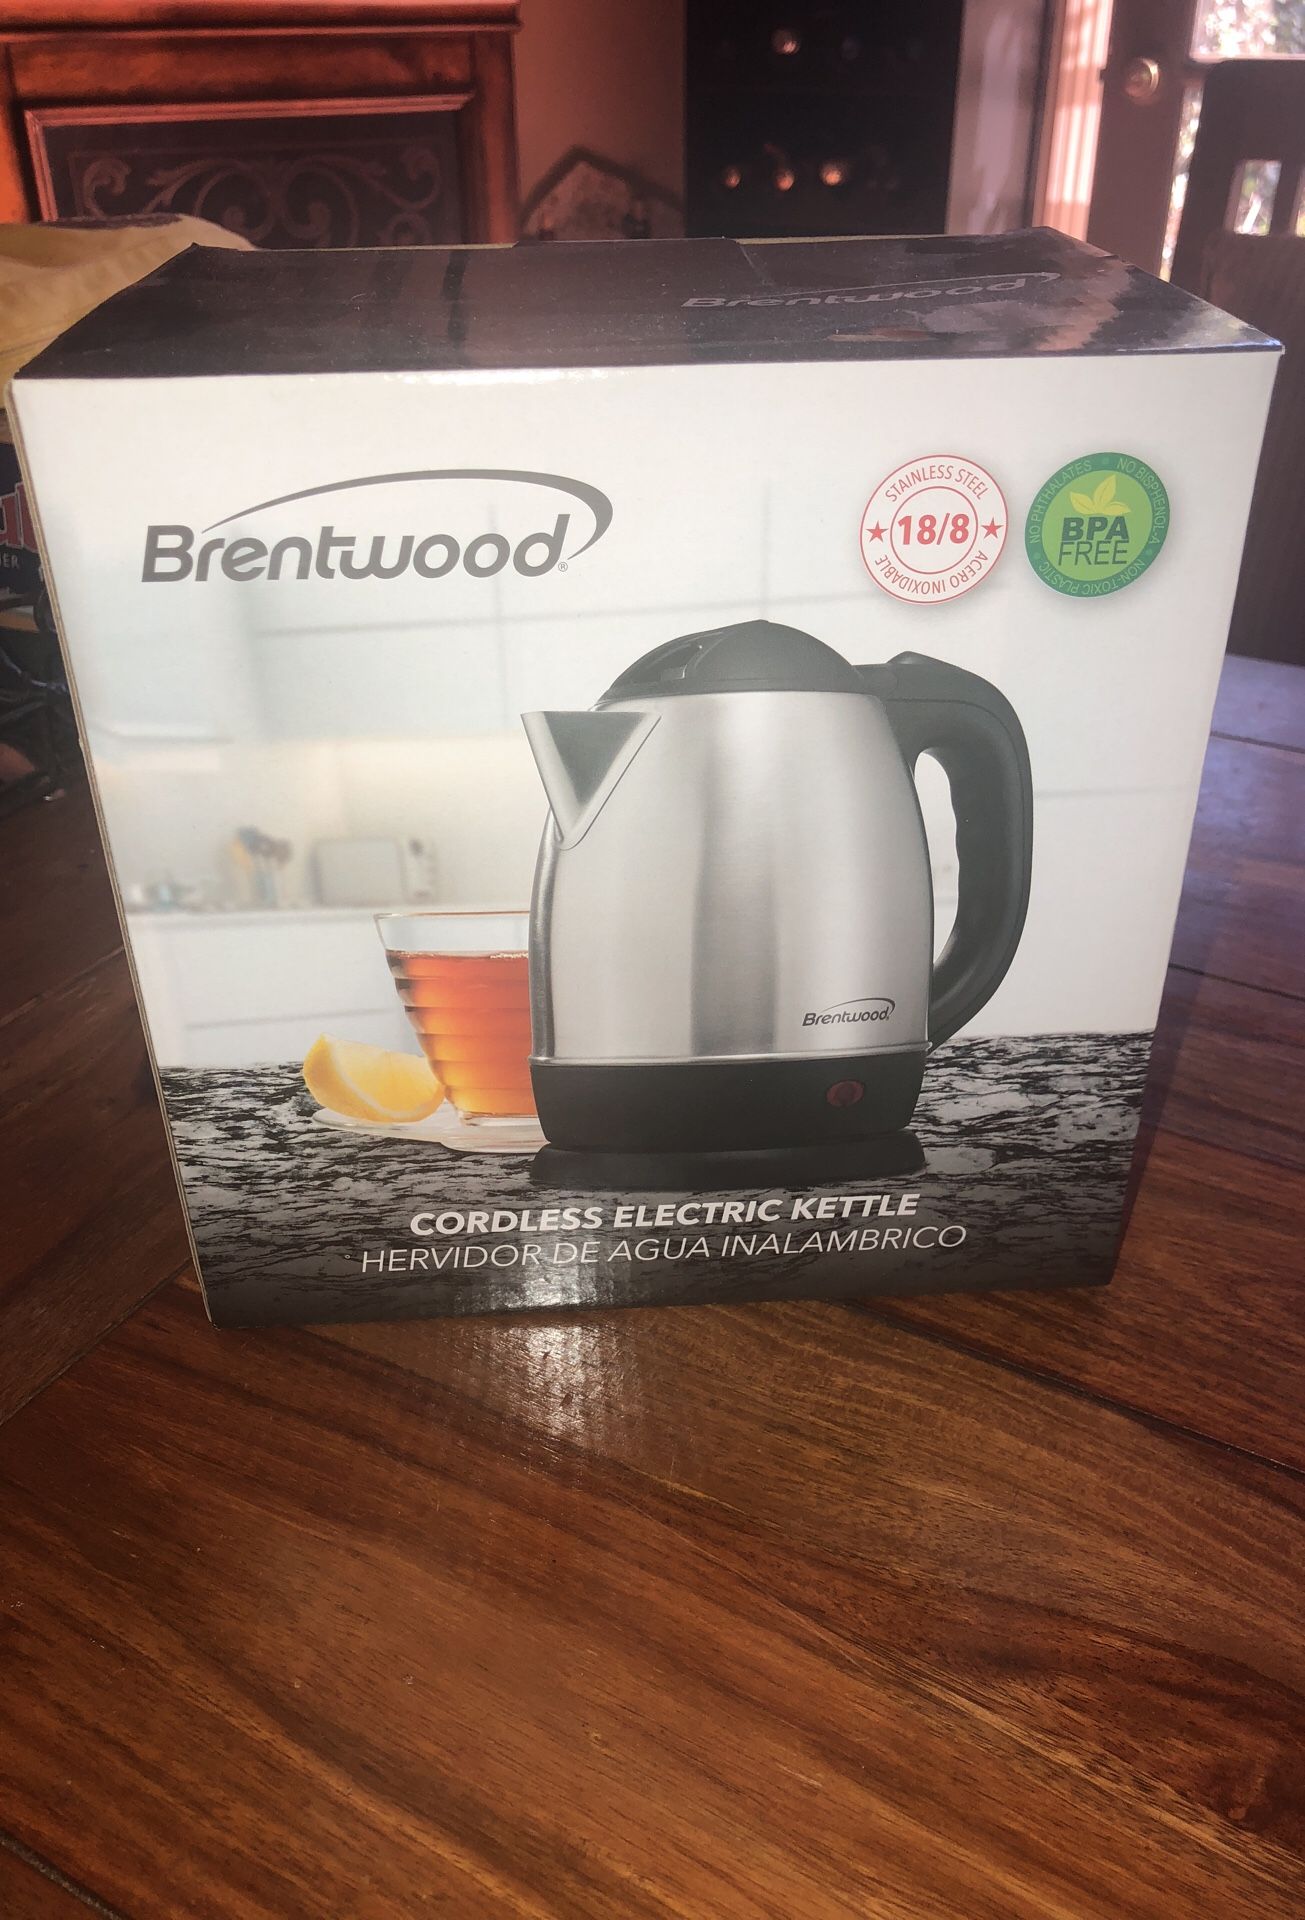 Brentwood cordless electric kettle